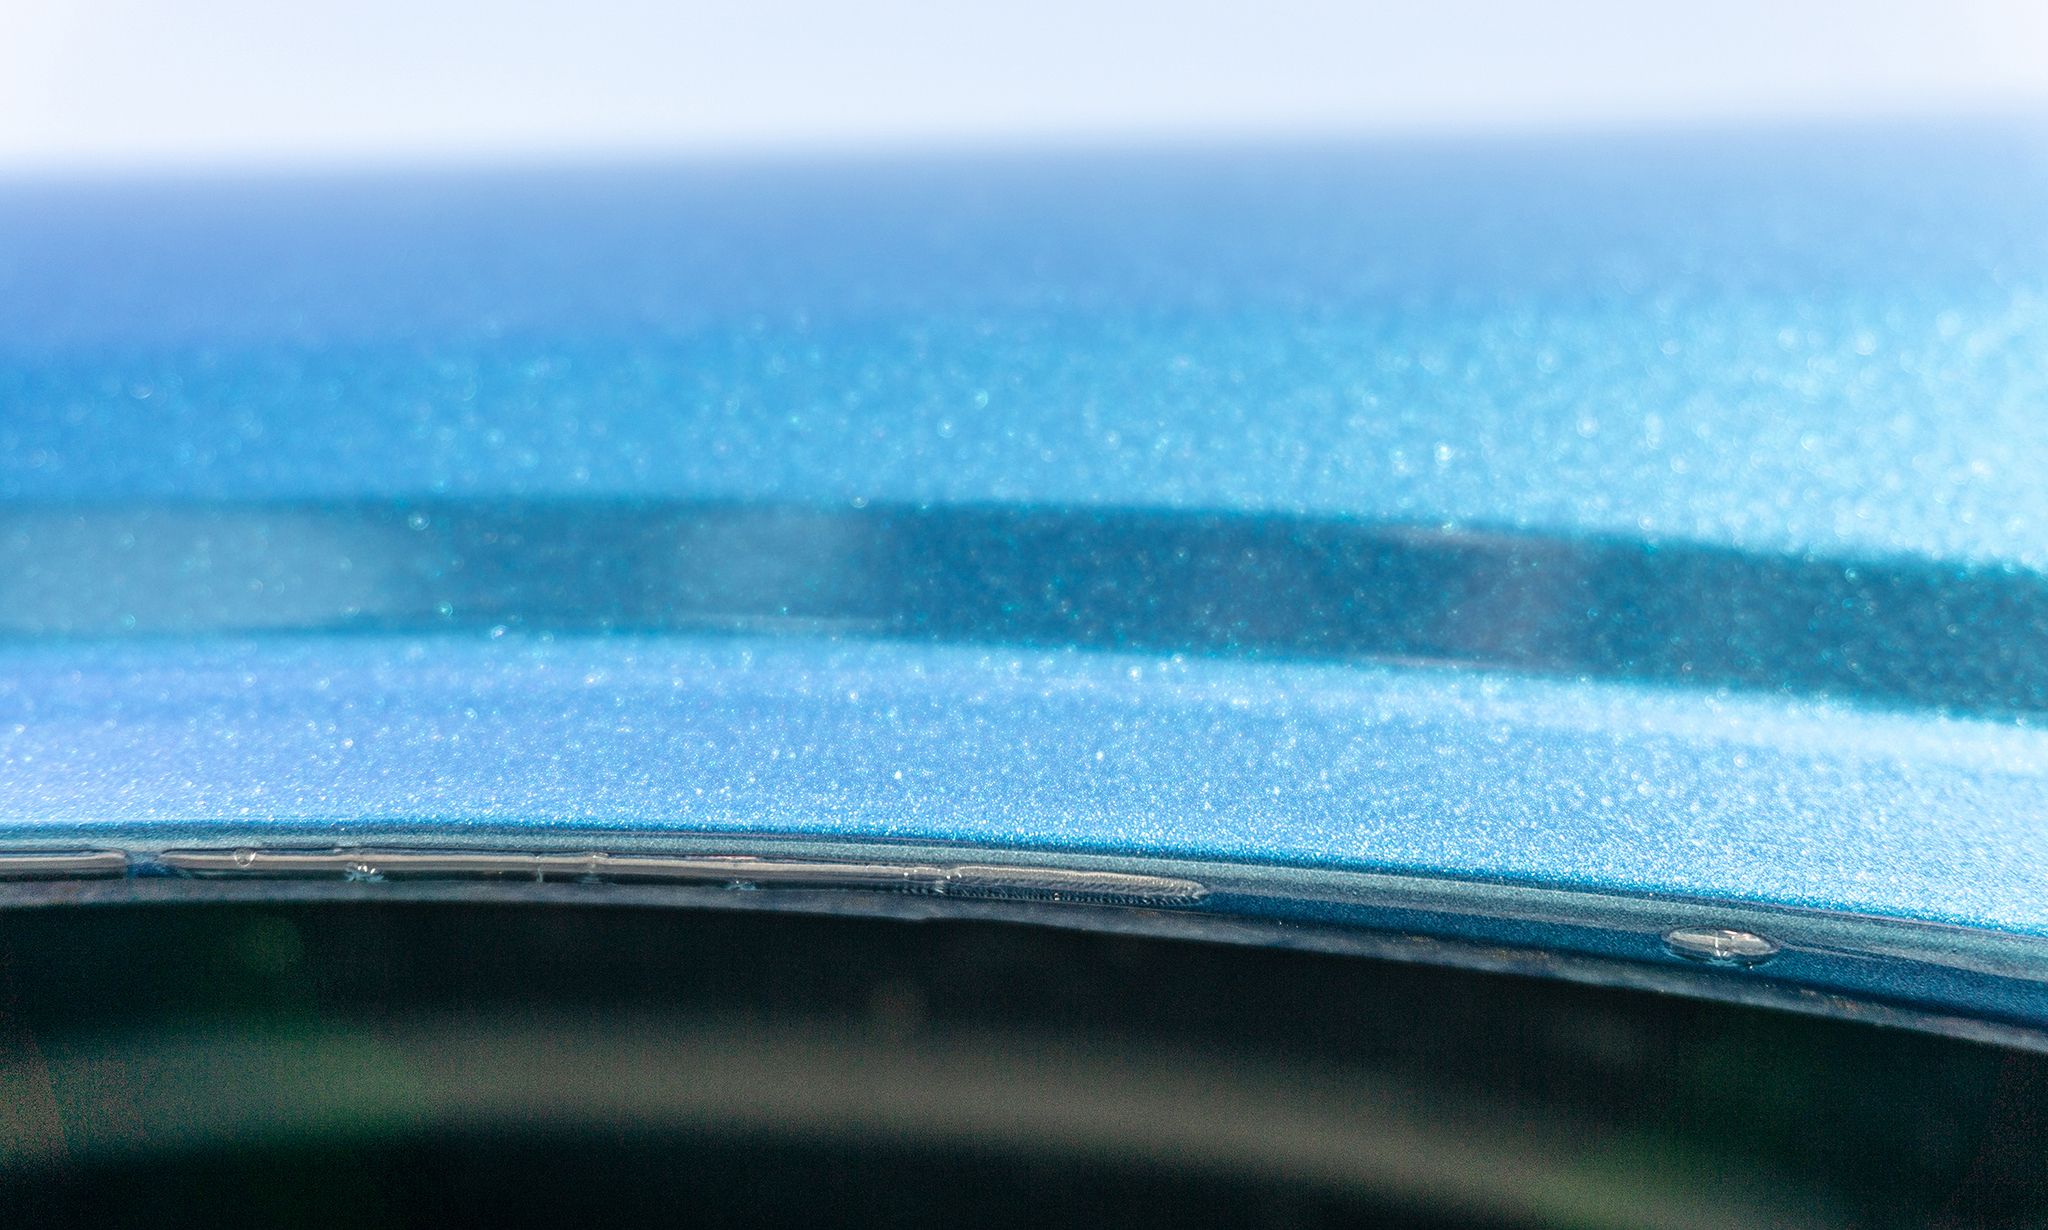 paint defects on a blue dodge challenger